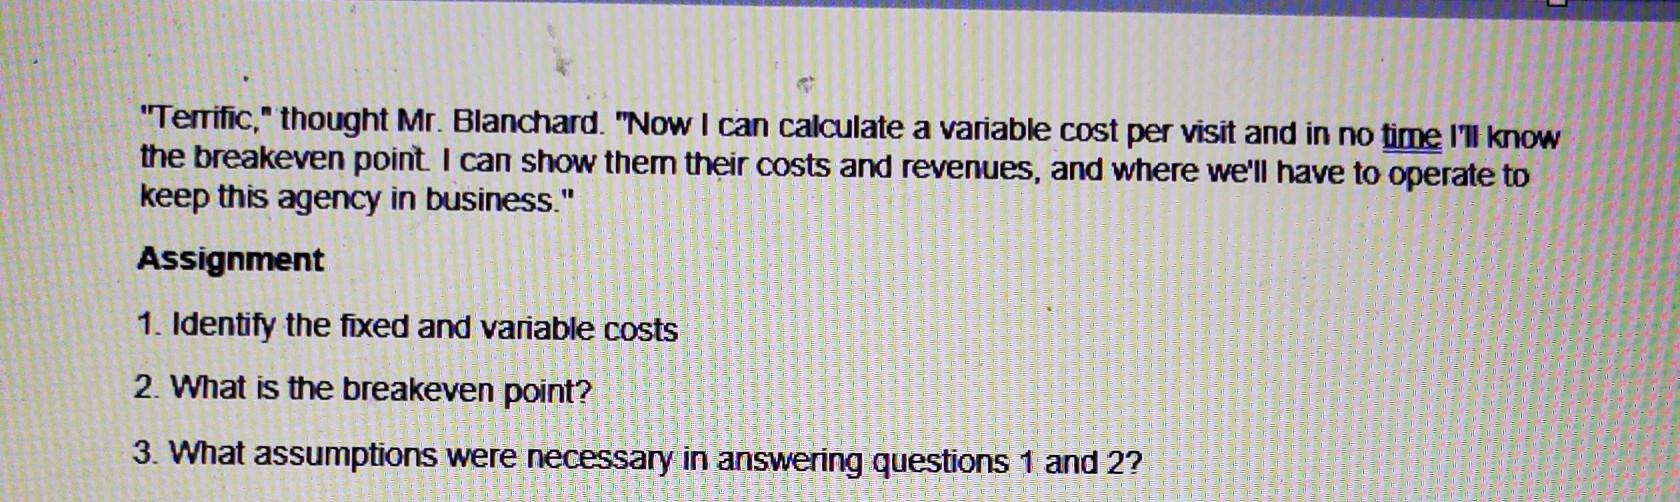 Terrific, thought Mr. Blanchard. Now I can calculate a variable cost per visit and in no time Ill know the breakeven poin